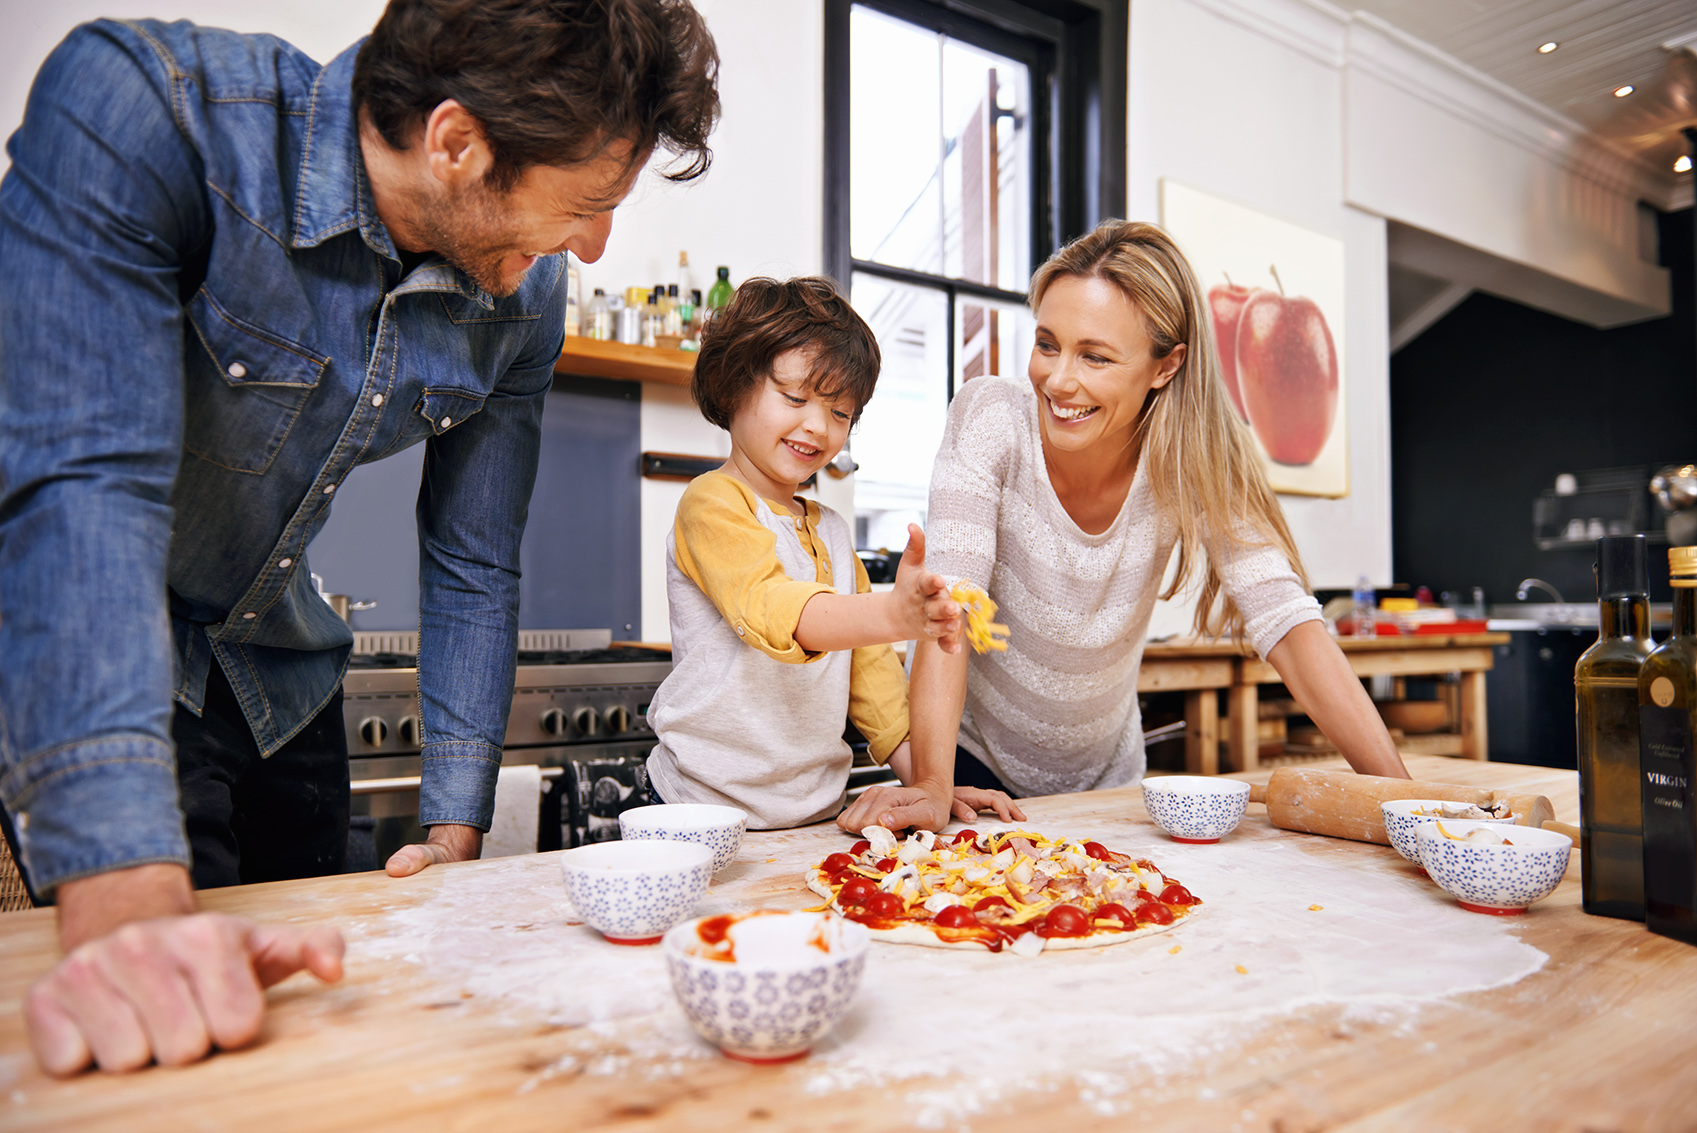 Make Your Own Pizza Family Night - Mommy Hates Cooking